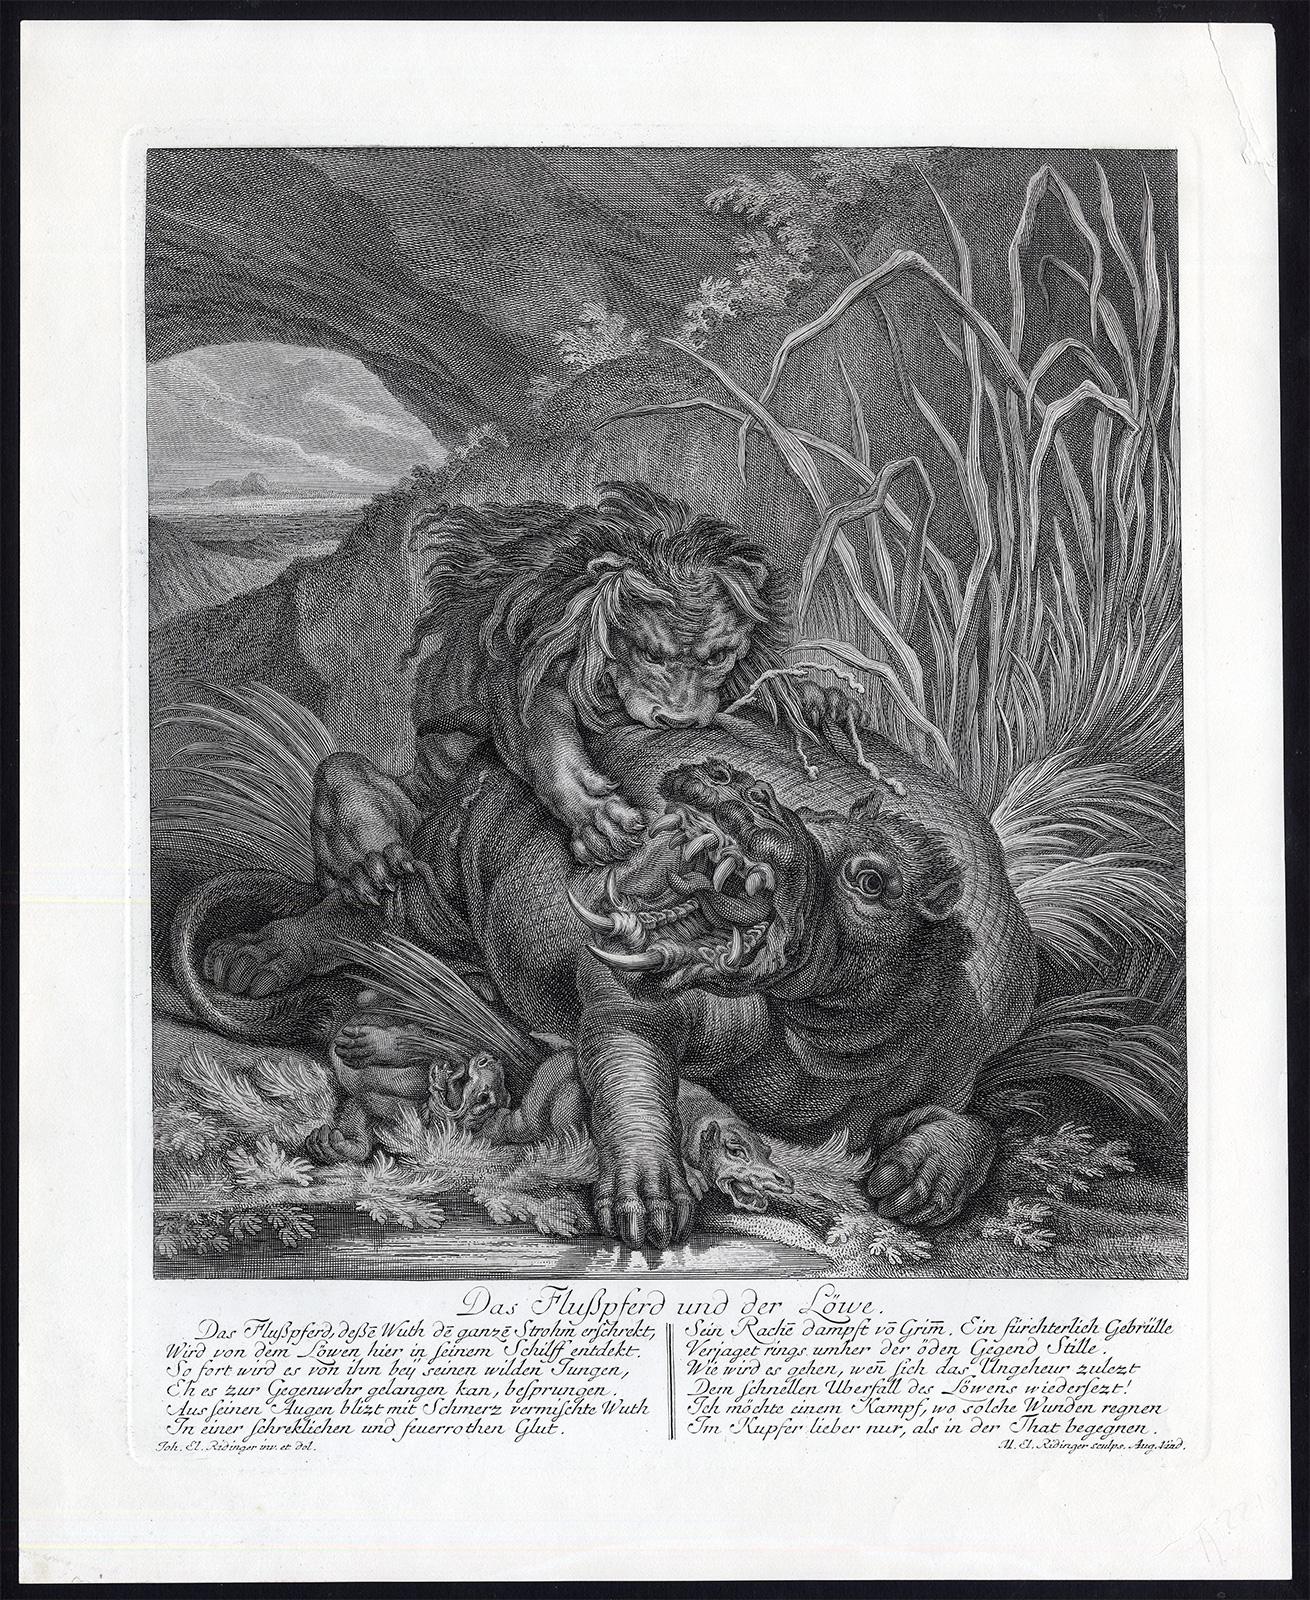 Hunting scene with a lion jumping a hippo by Ridinger - Engraving - 18th c - Print by Martin Elias Ridinger